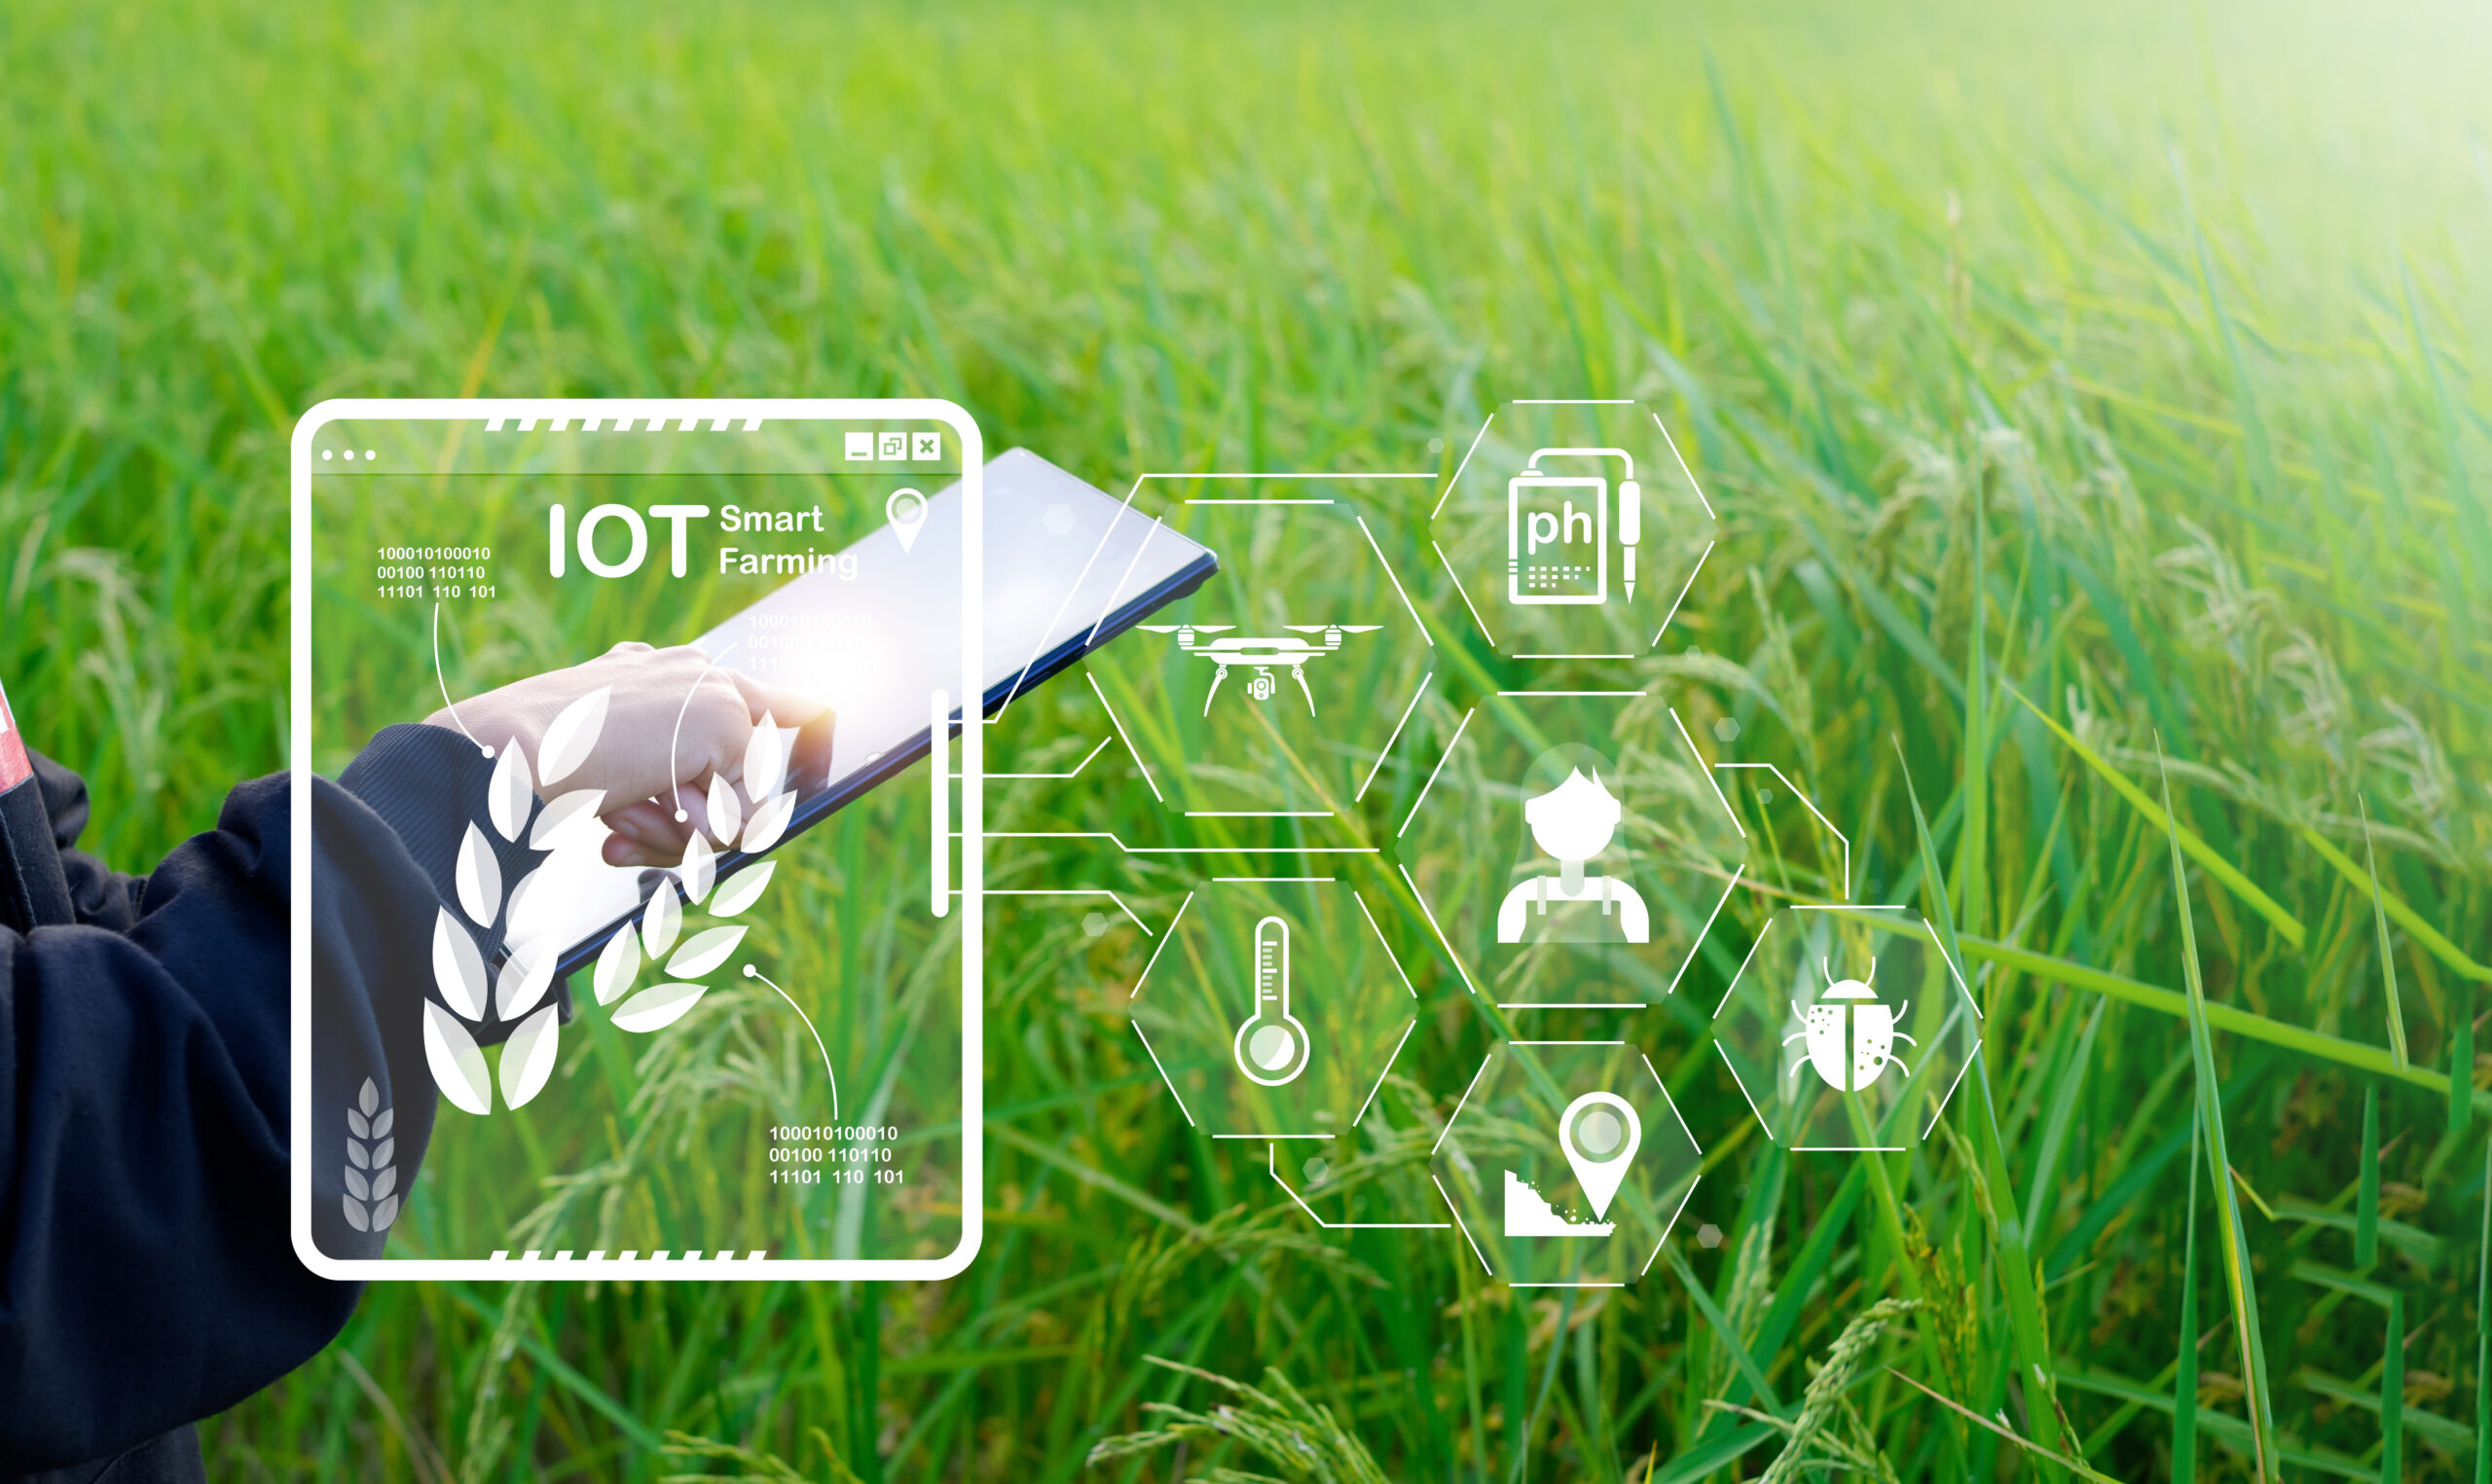 CoC in Internet of Things (Smart Energy Management)